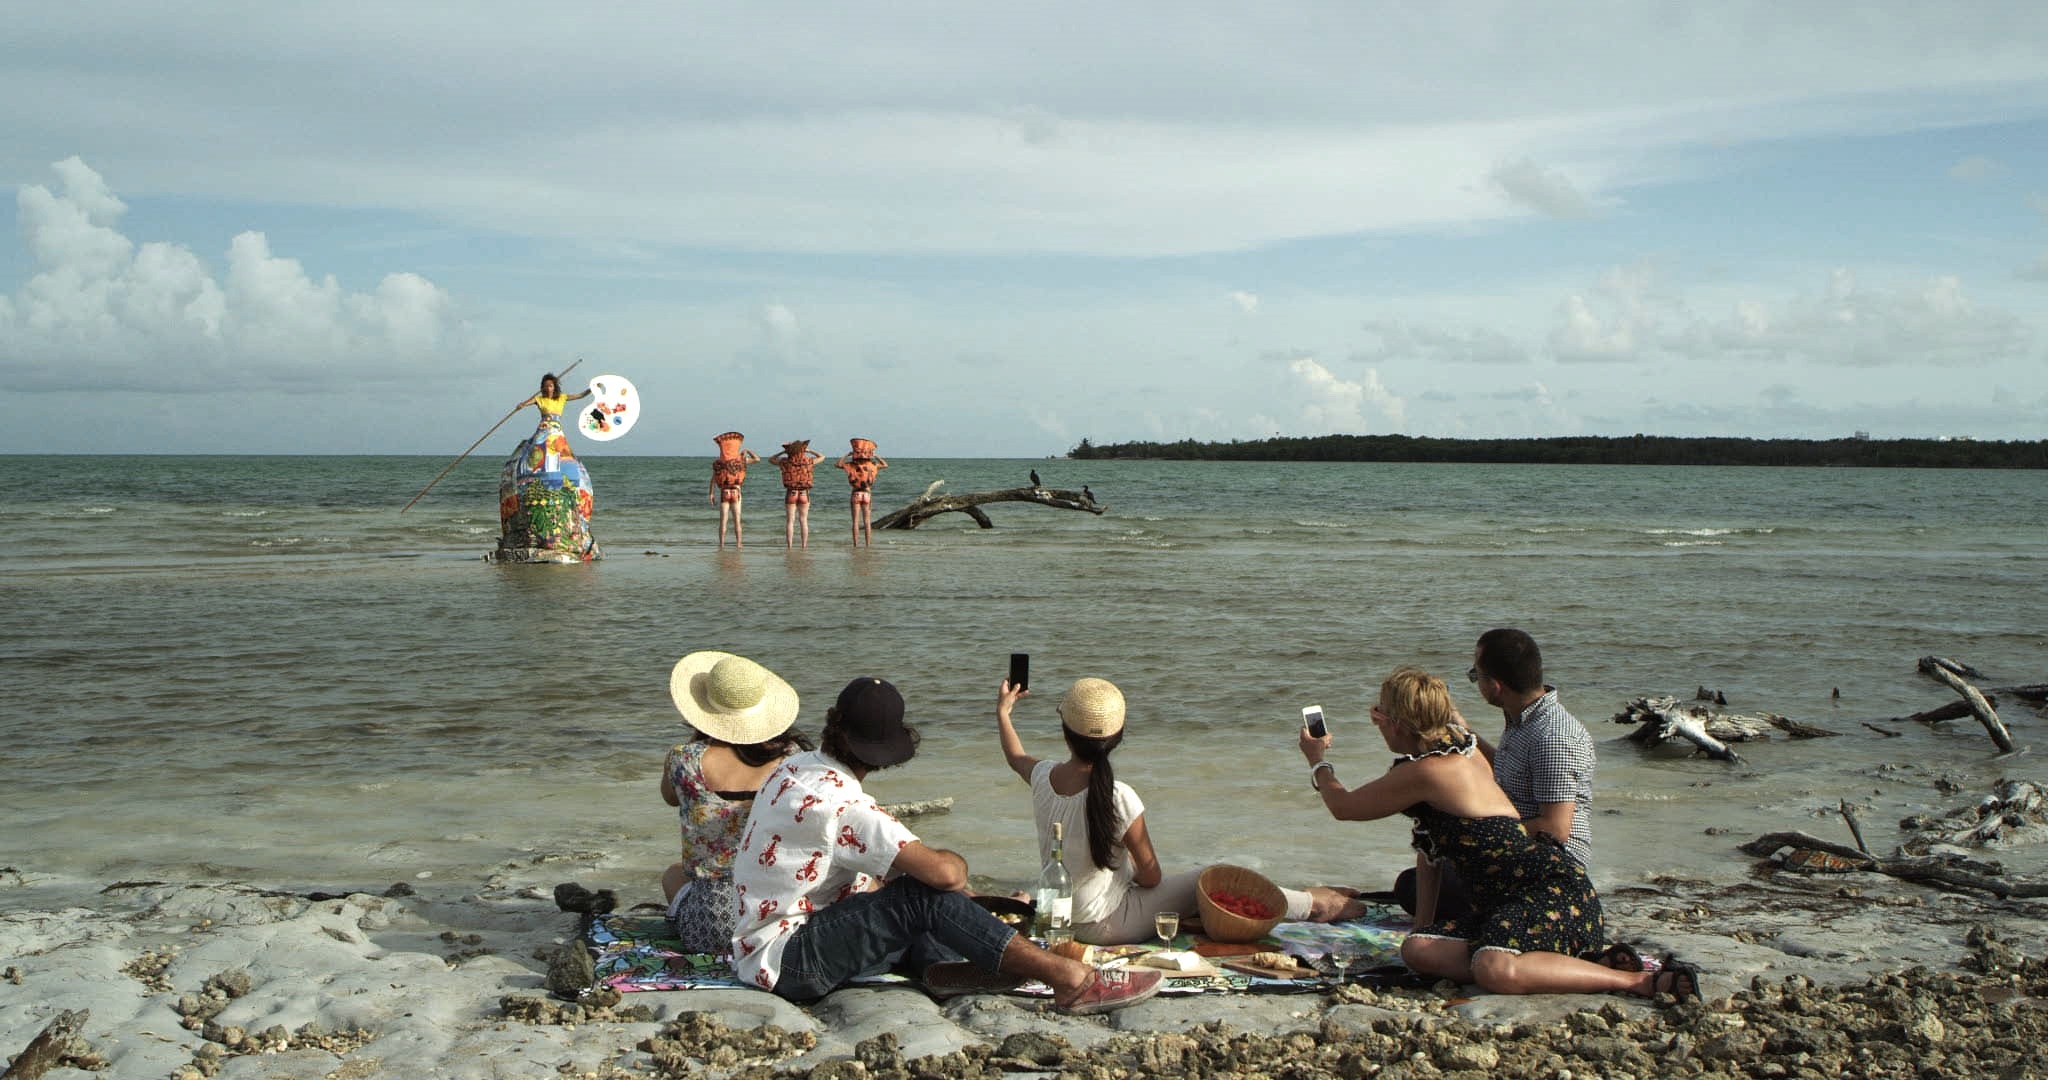 Five adults on a beach hold their phones up towards the water where three people in orange costumes stand next to one person emerging from a colorful structure holding a giant paint palette and stick.